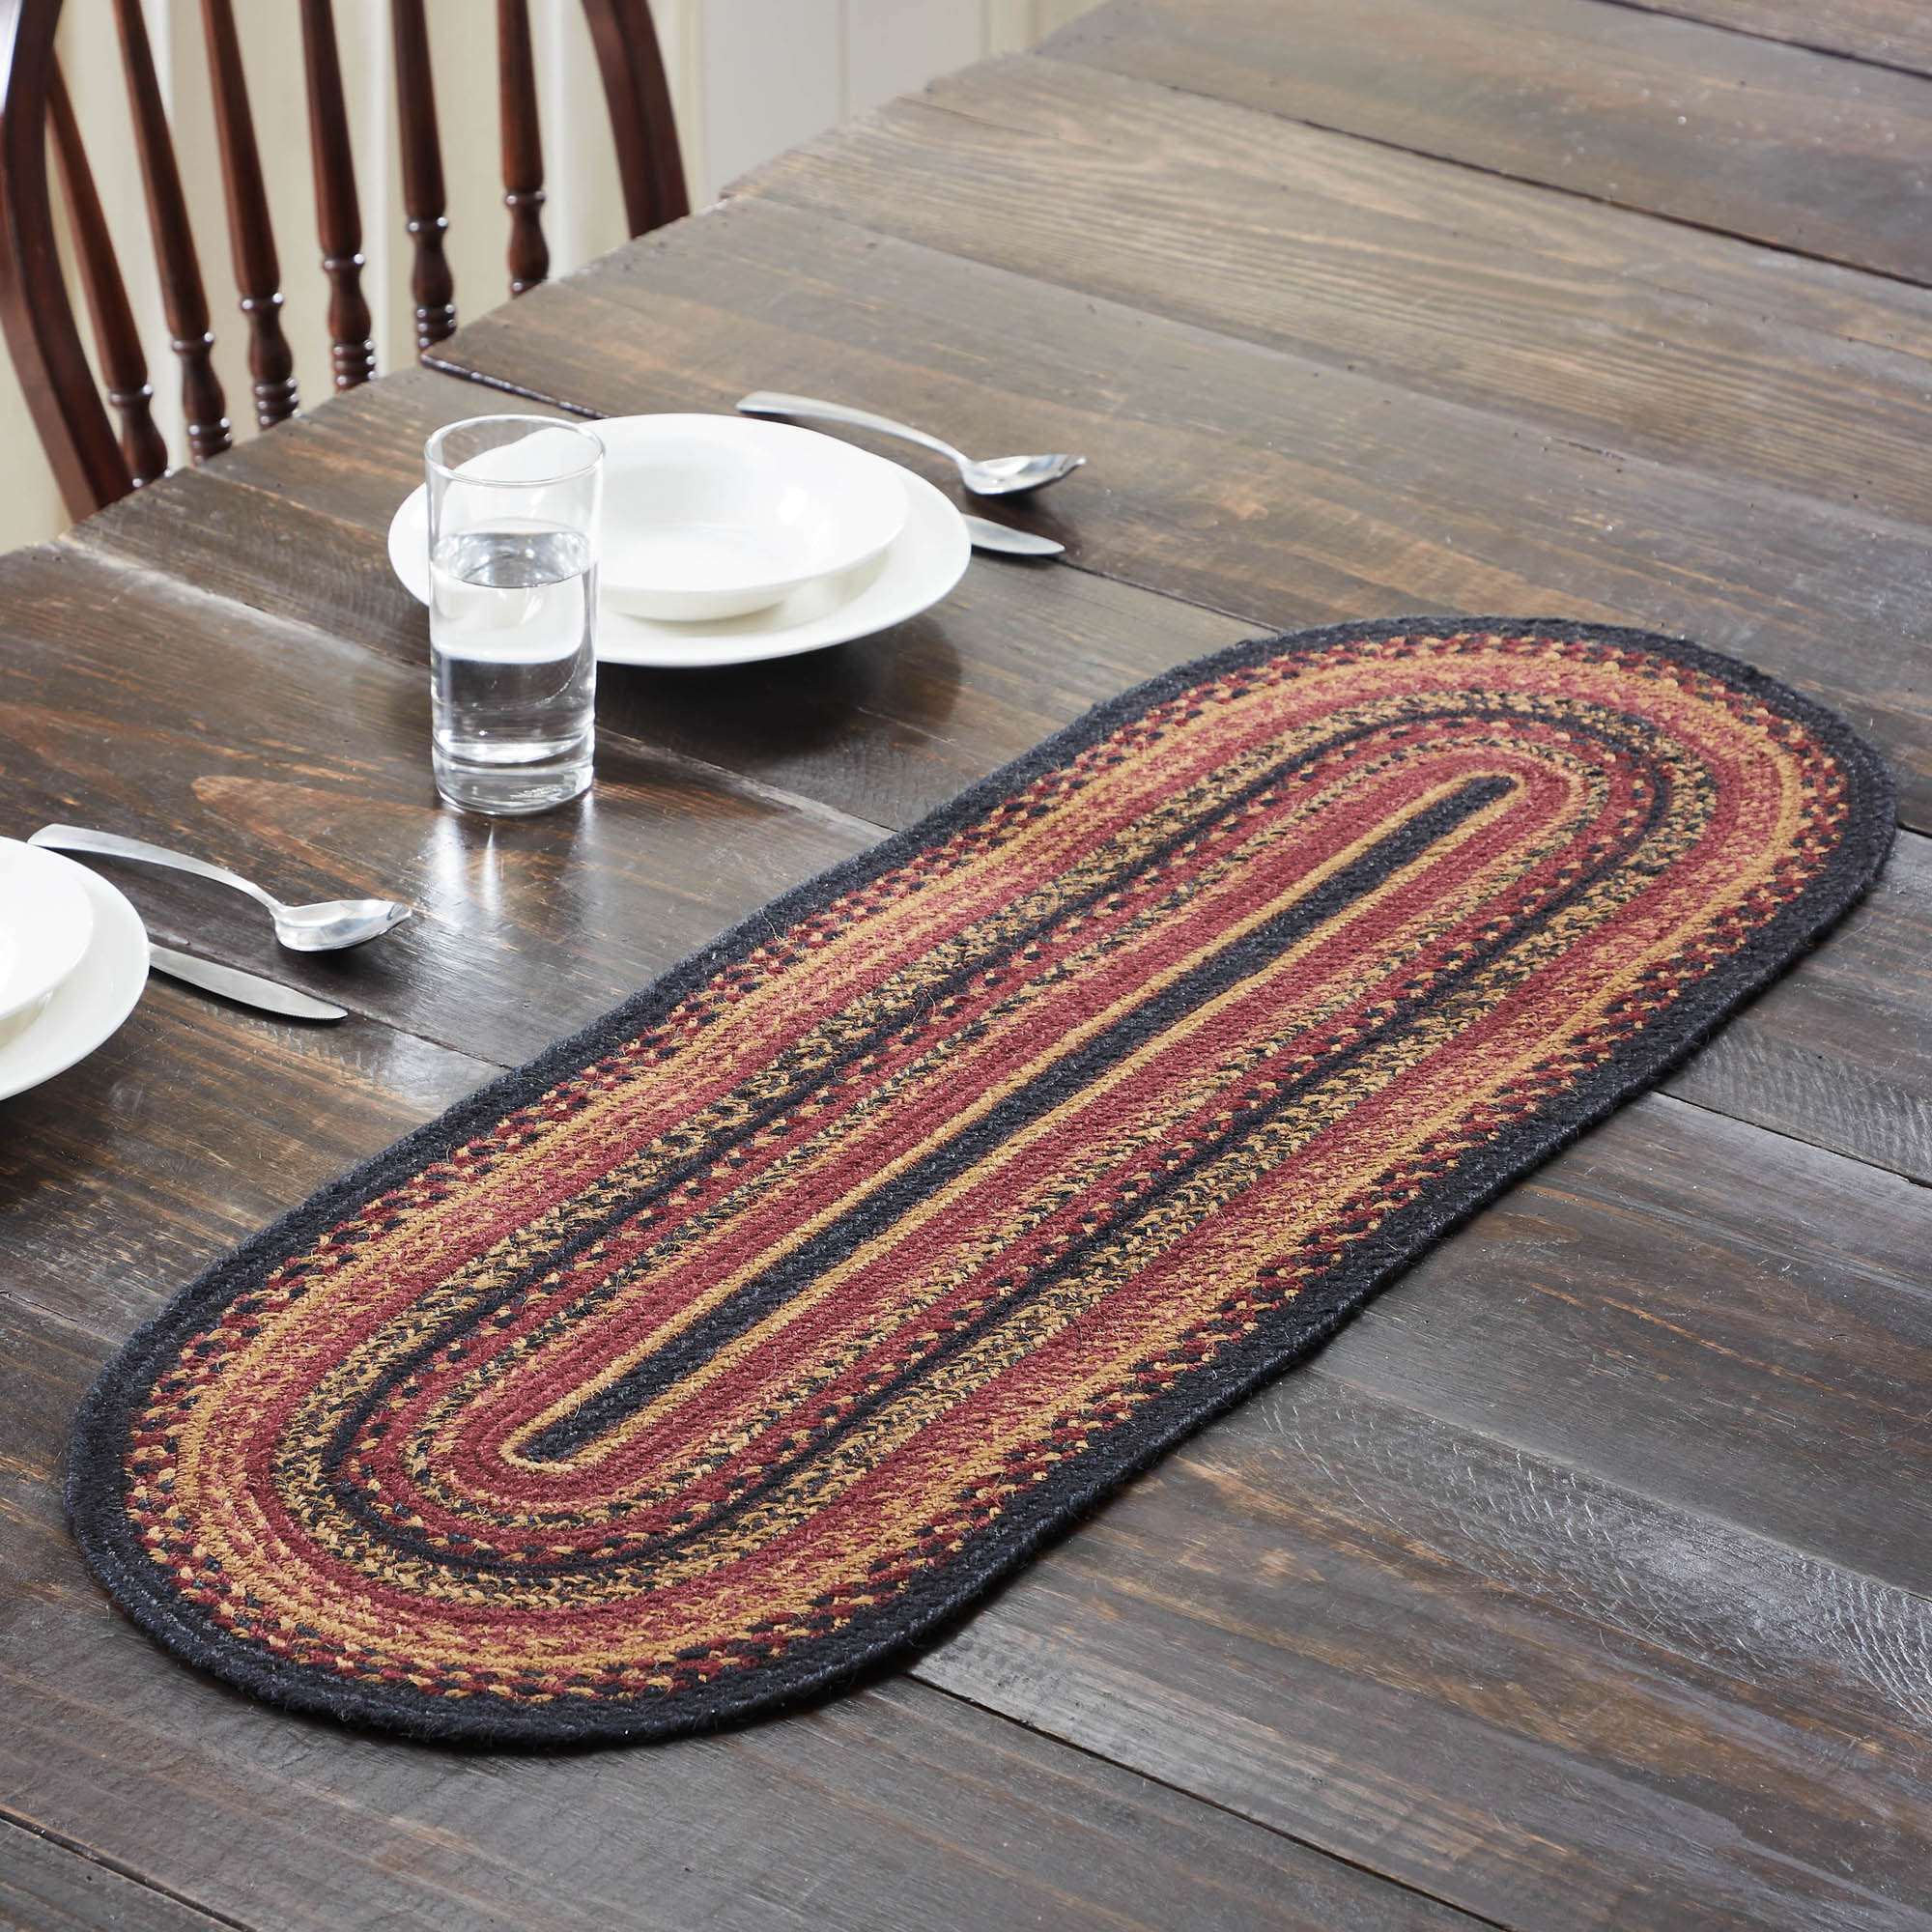 Heritage Farms Jute Oval Runner 13x36 VHC Brands